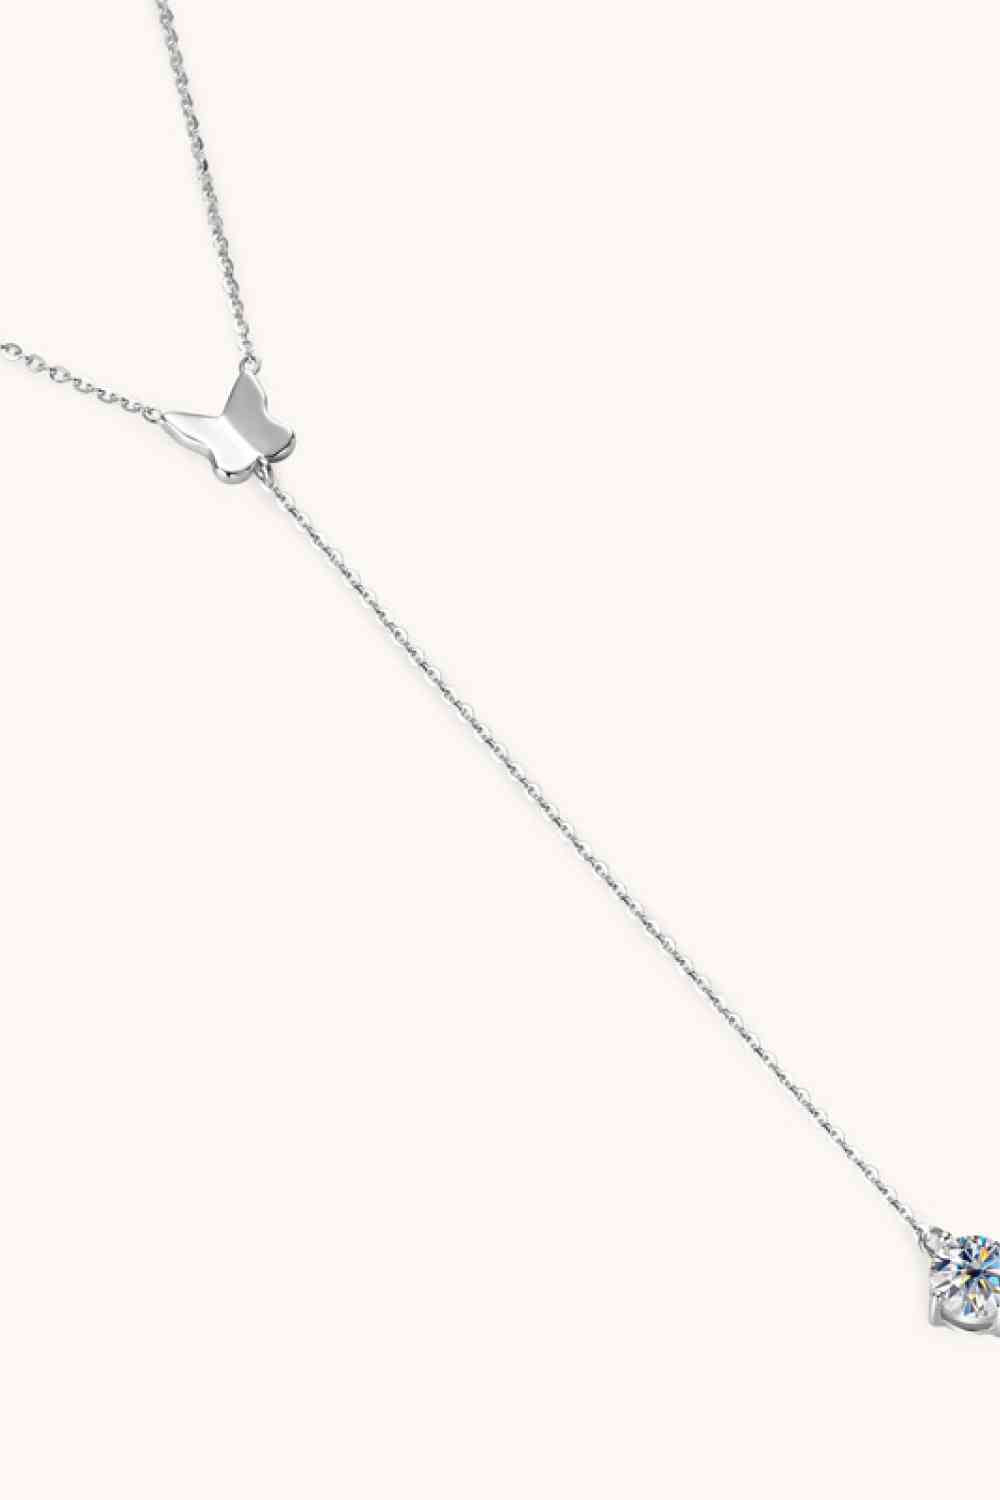 1 Carat Moissanite 925 Sterling Butterfly Silver Necklace 💜